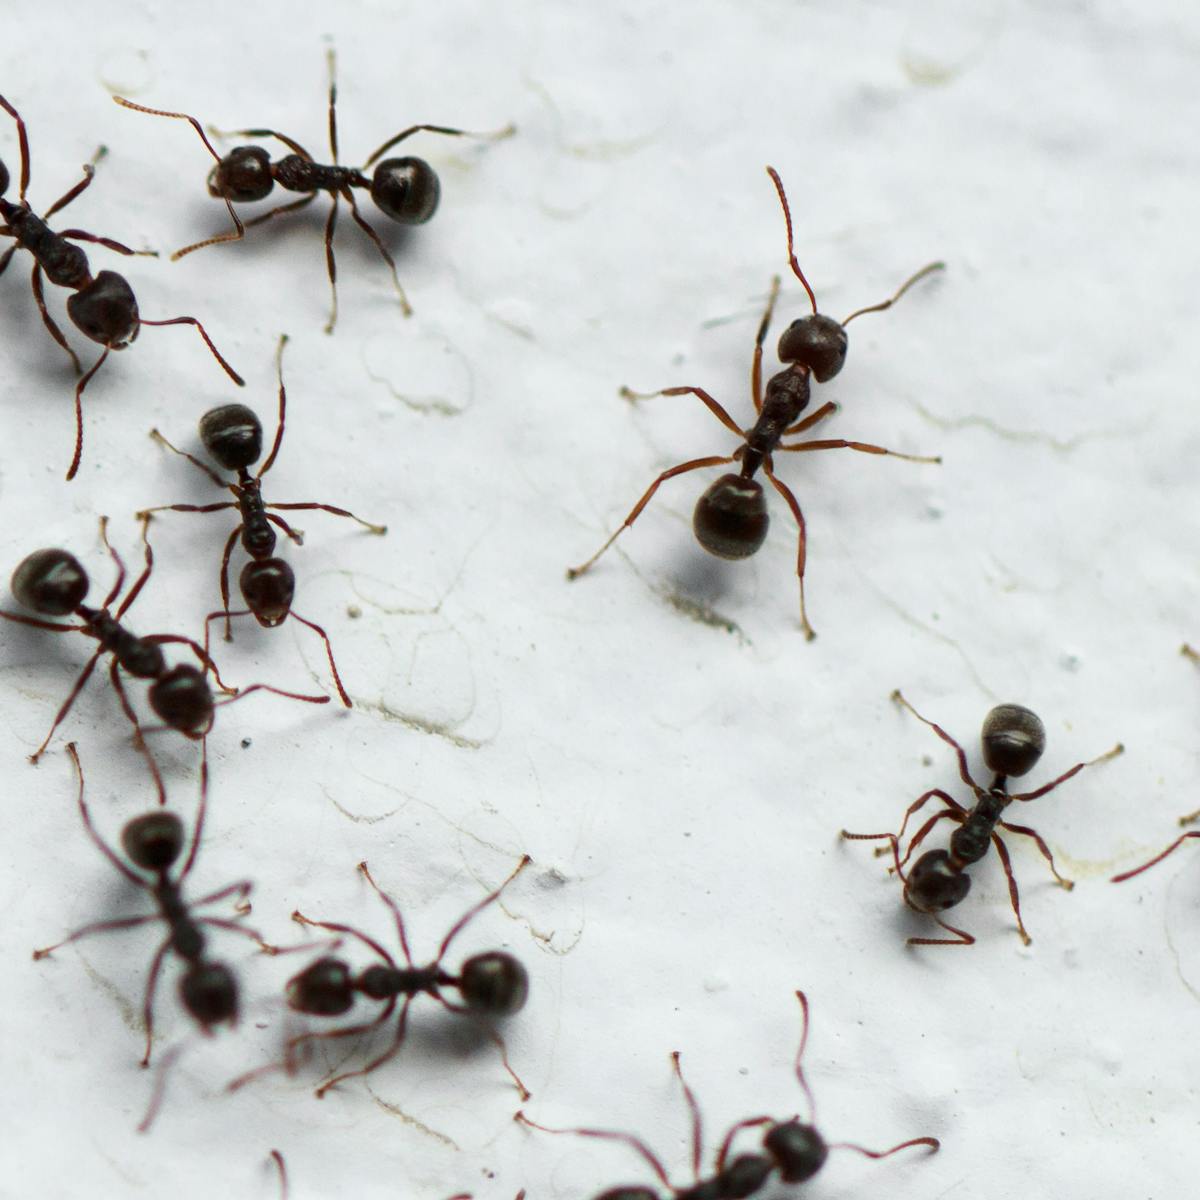 Curious Kids: how are ants and other creatures able to walk on the ceiling?